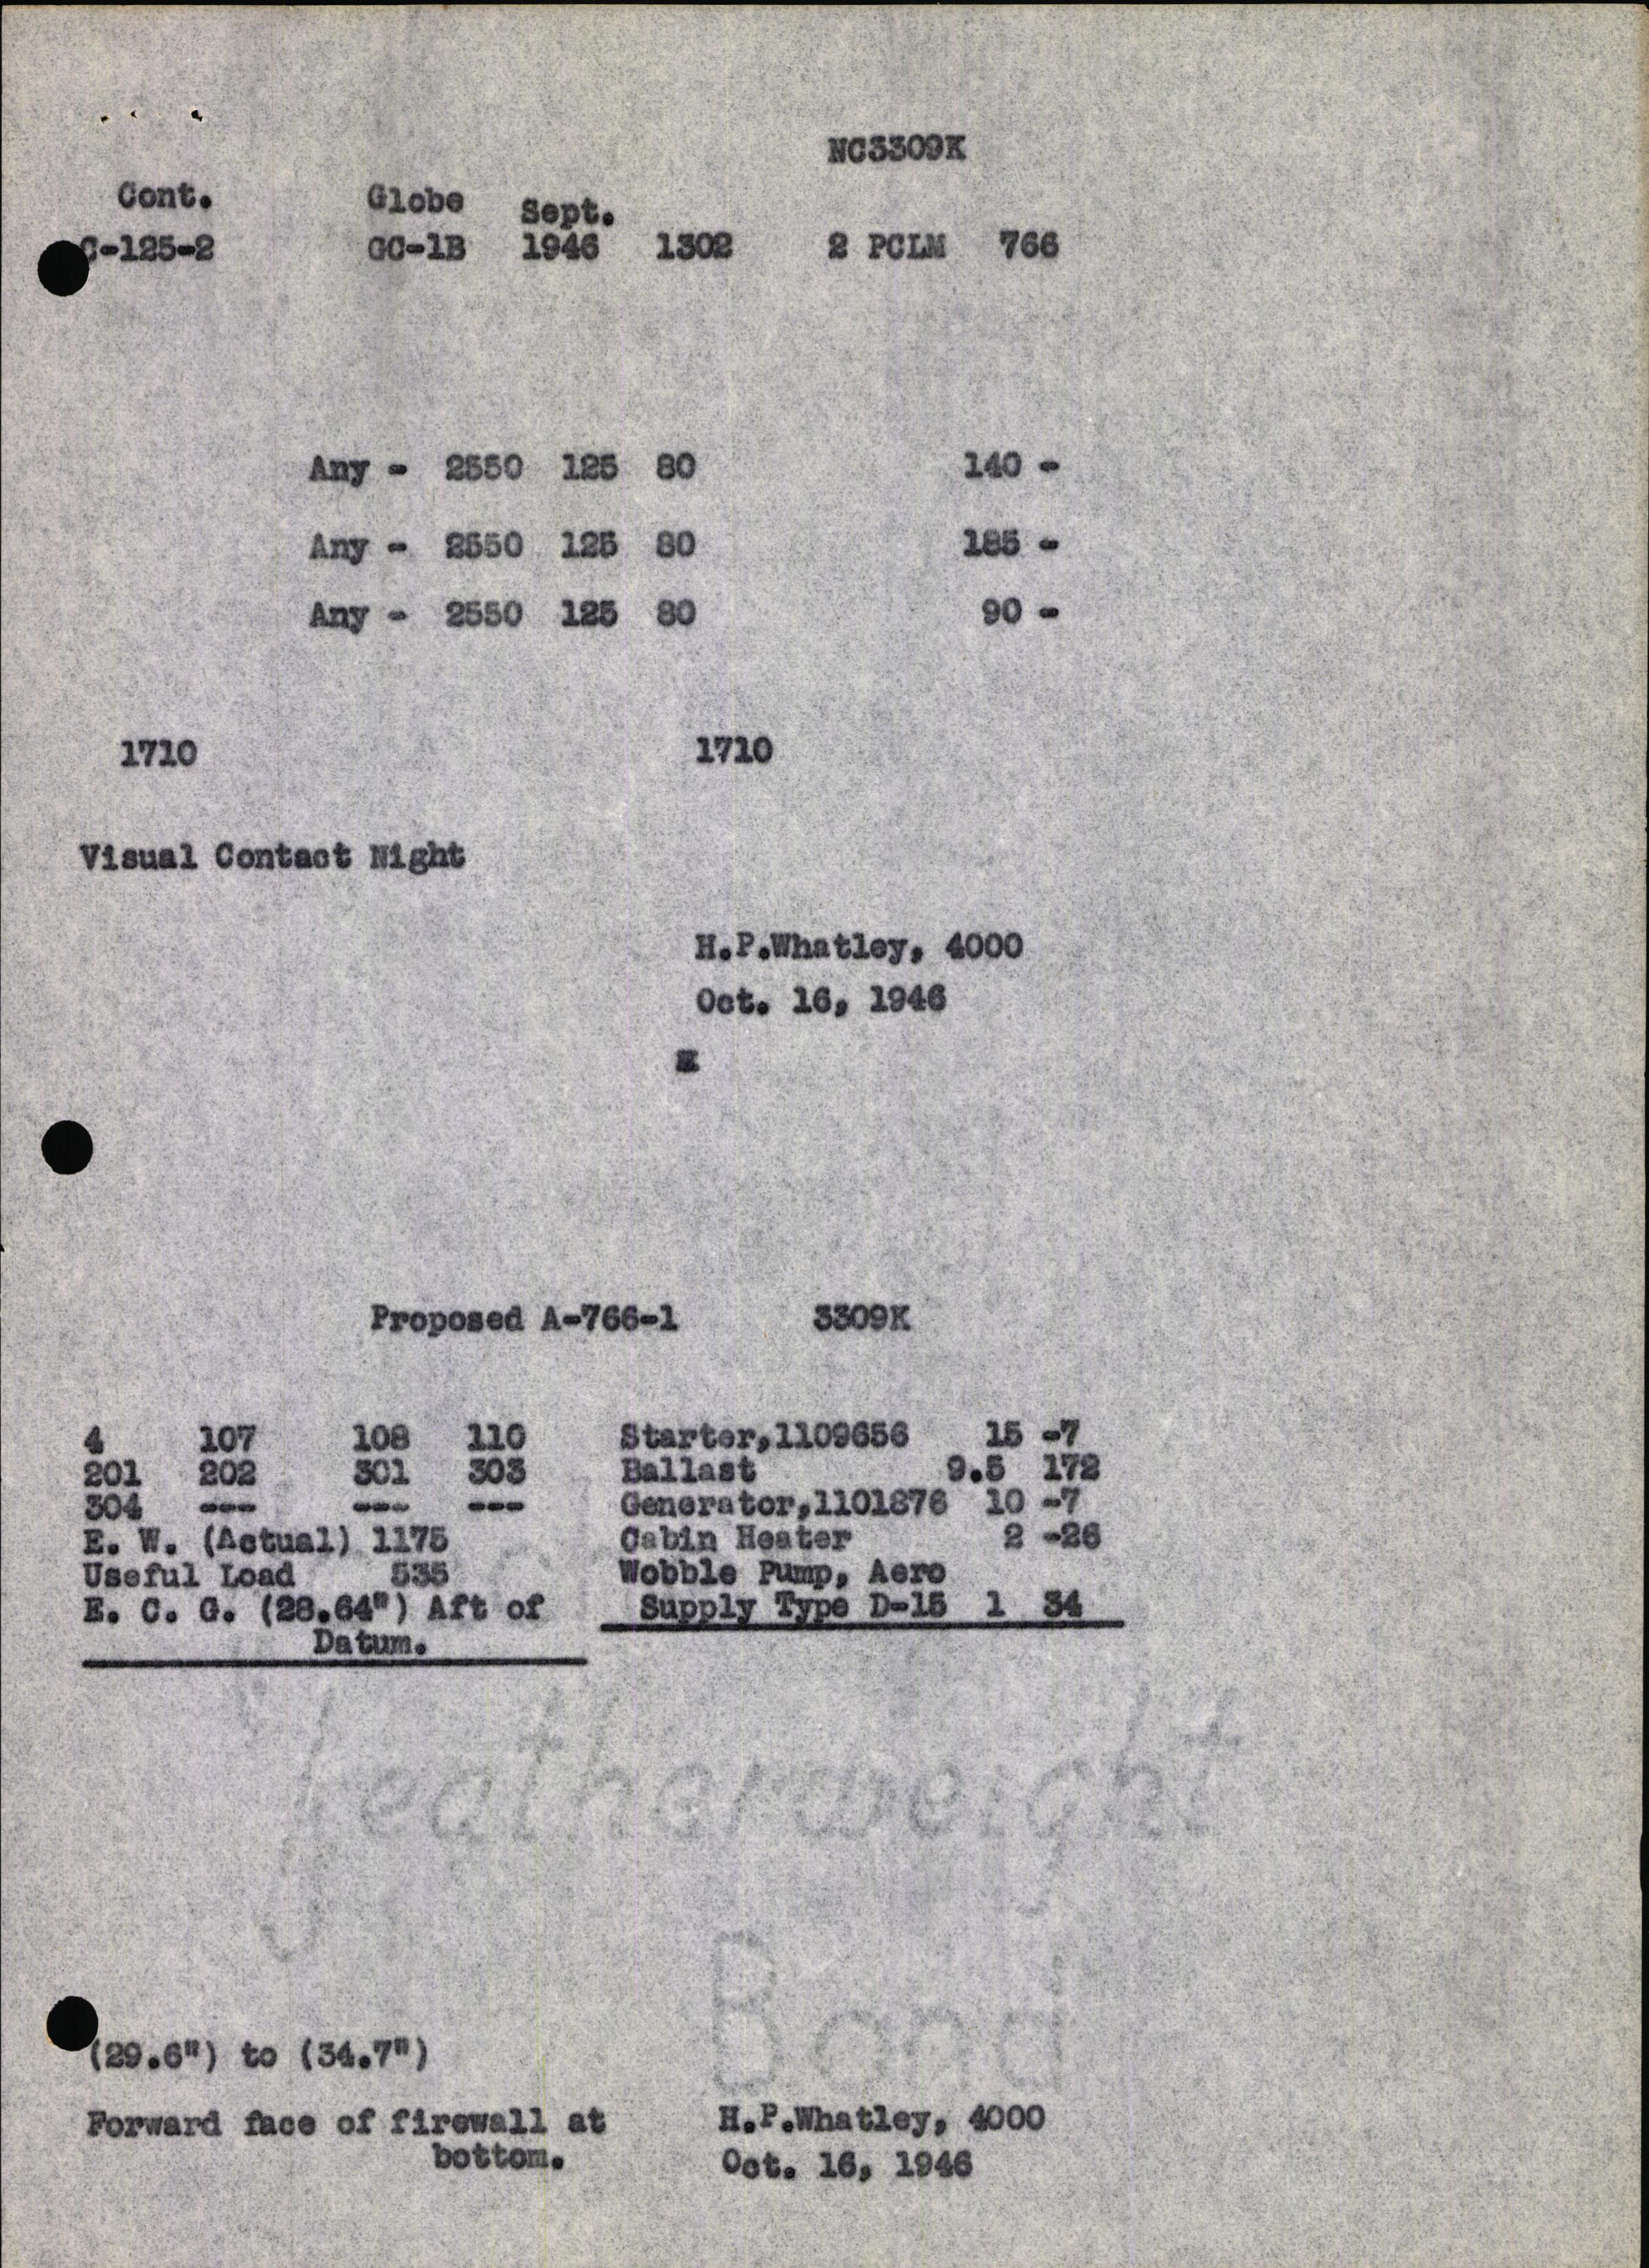 Sample page 11 from AirCorps Library document: Technical Information for Serial Number 1302